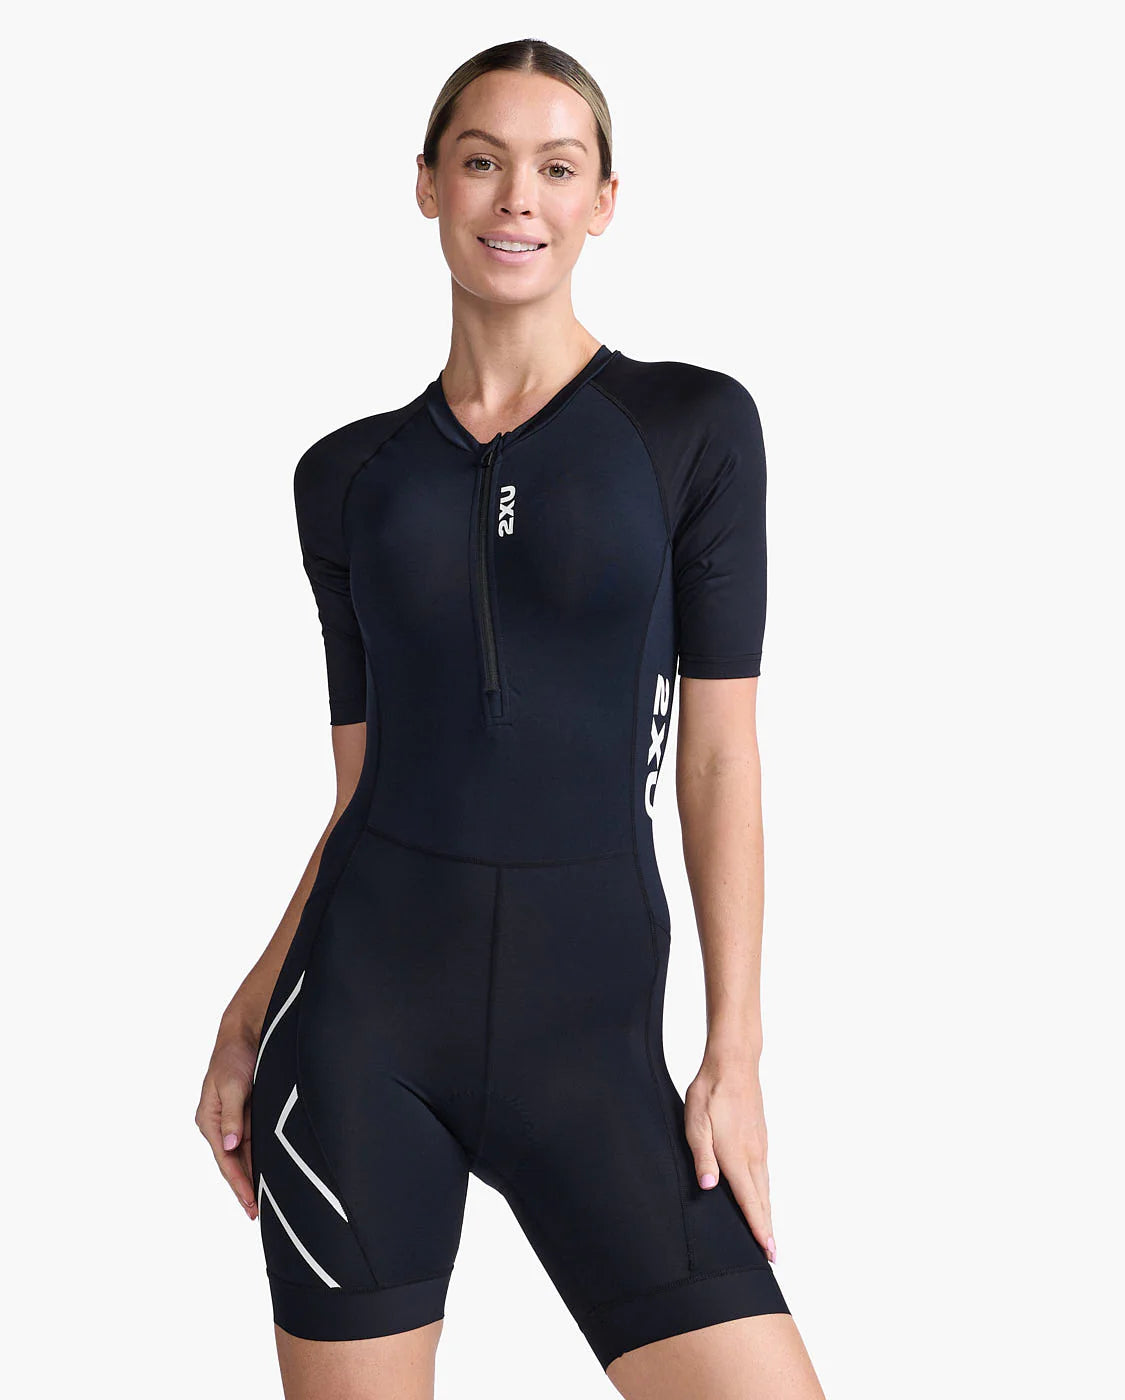 Trisuit Mujer Core Sleeved - Black/White - 2XU